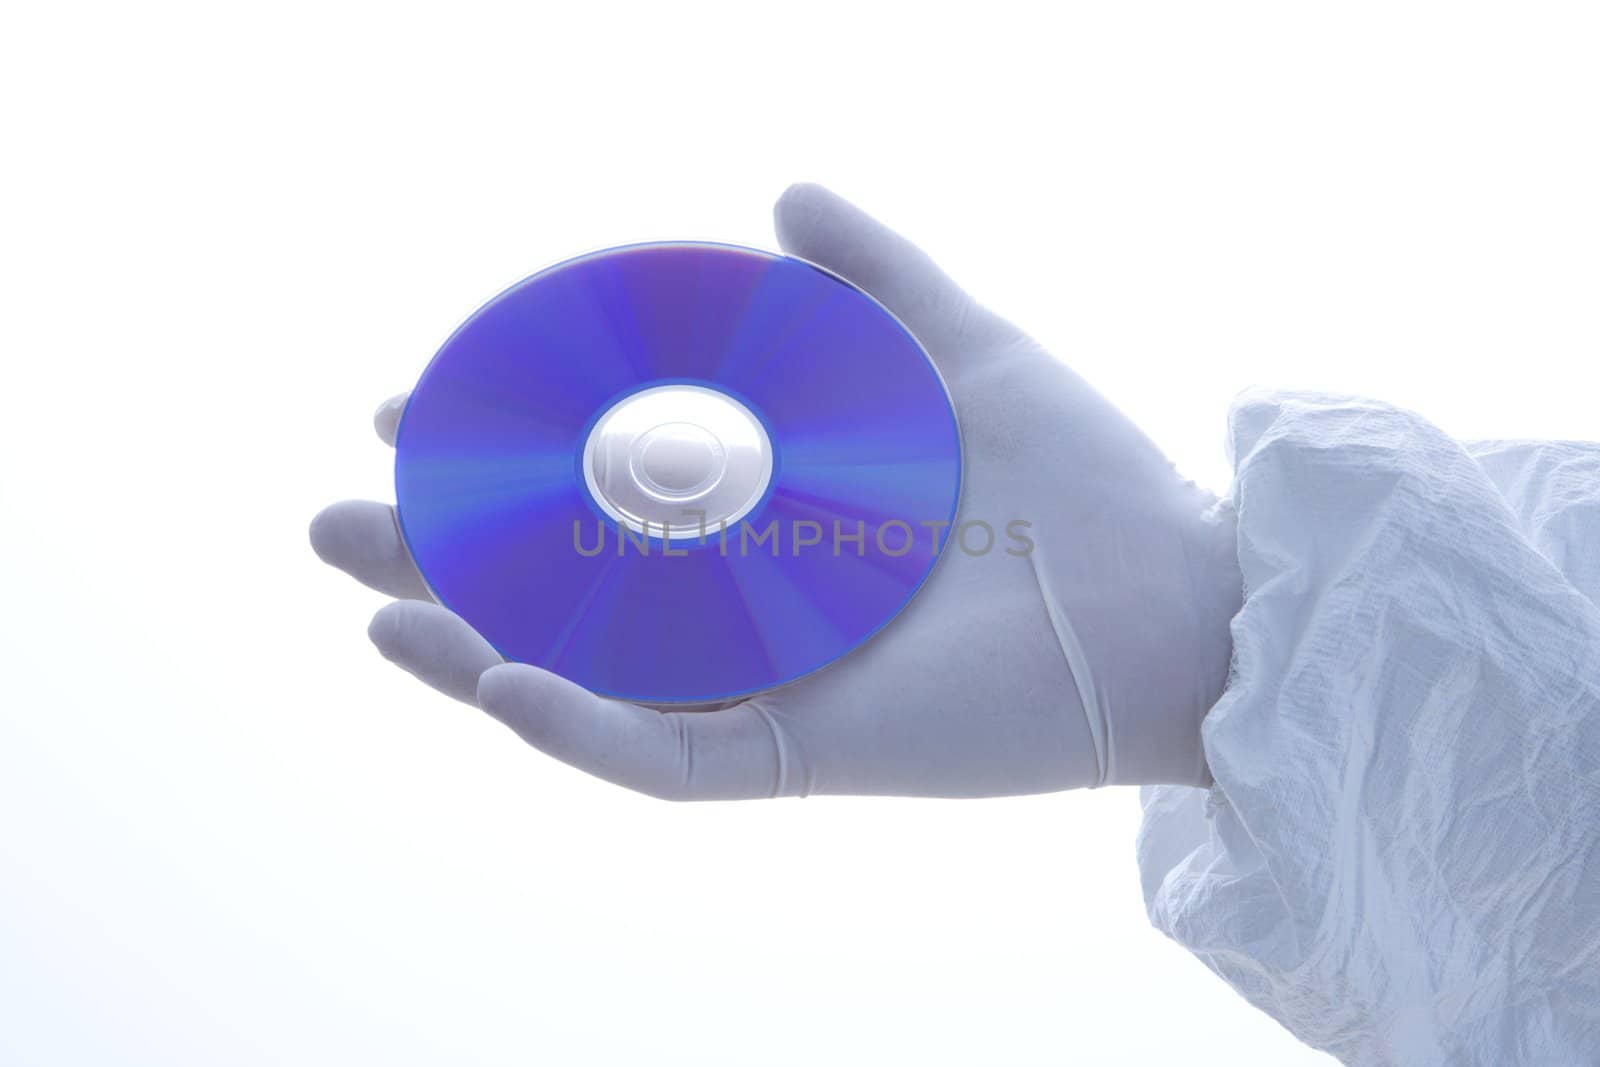 Hand in latex glove holding disc against white background.